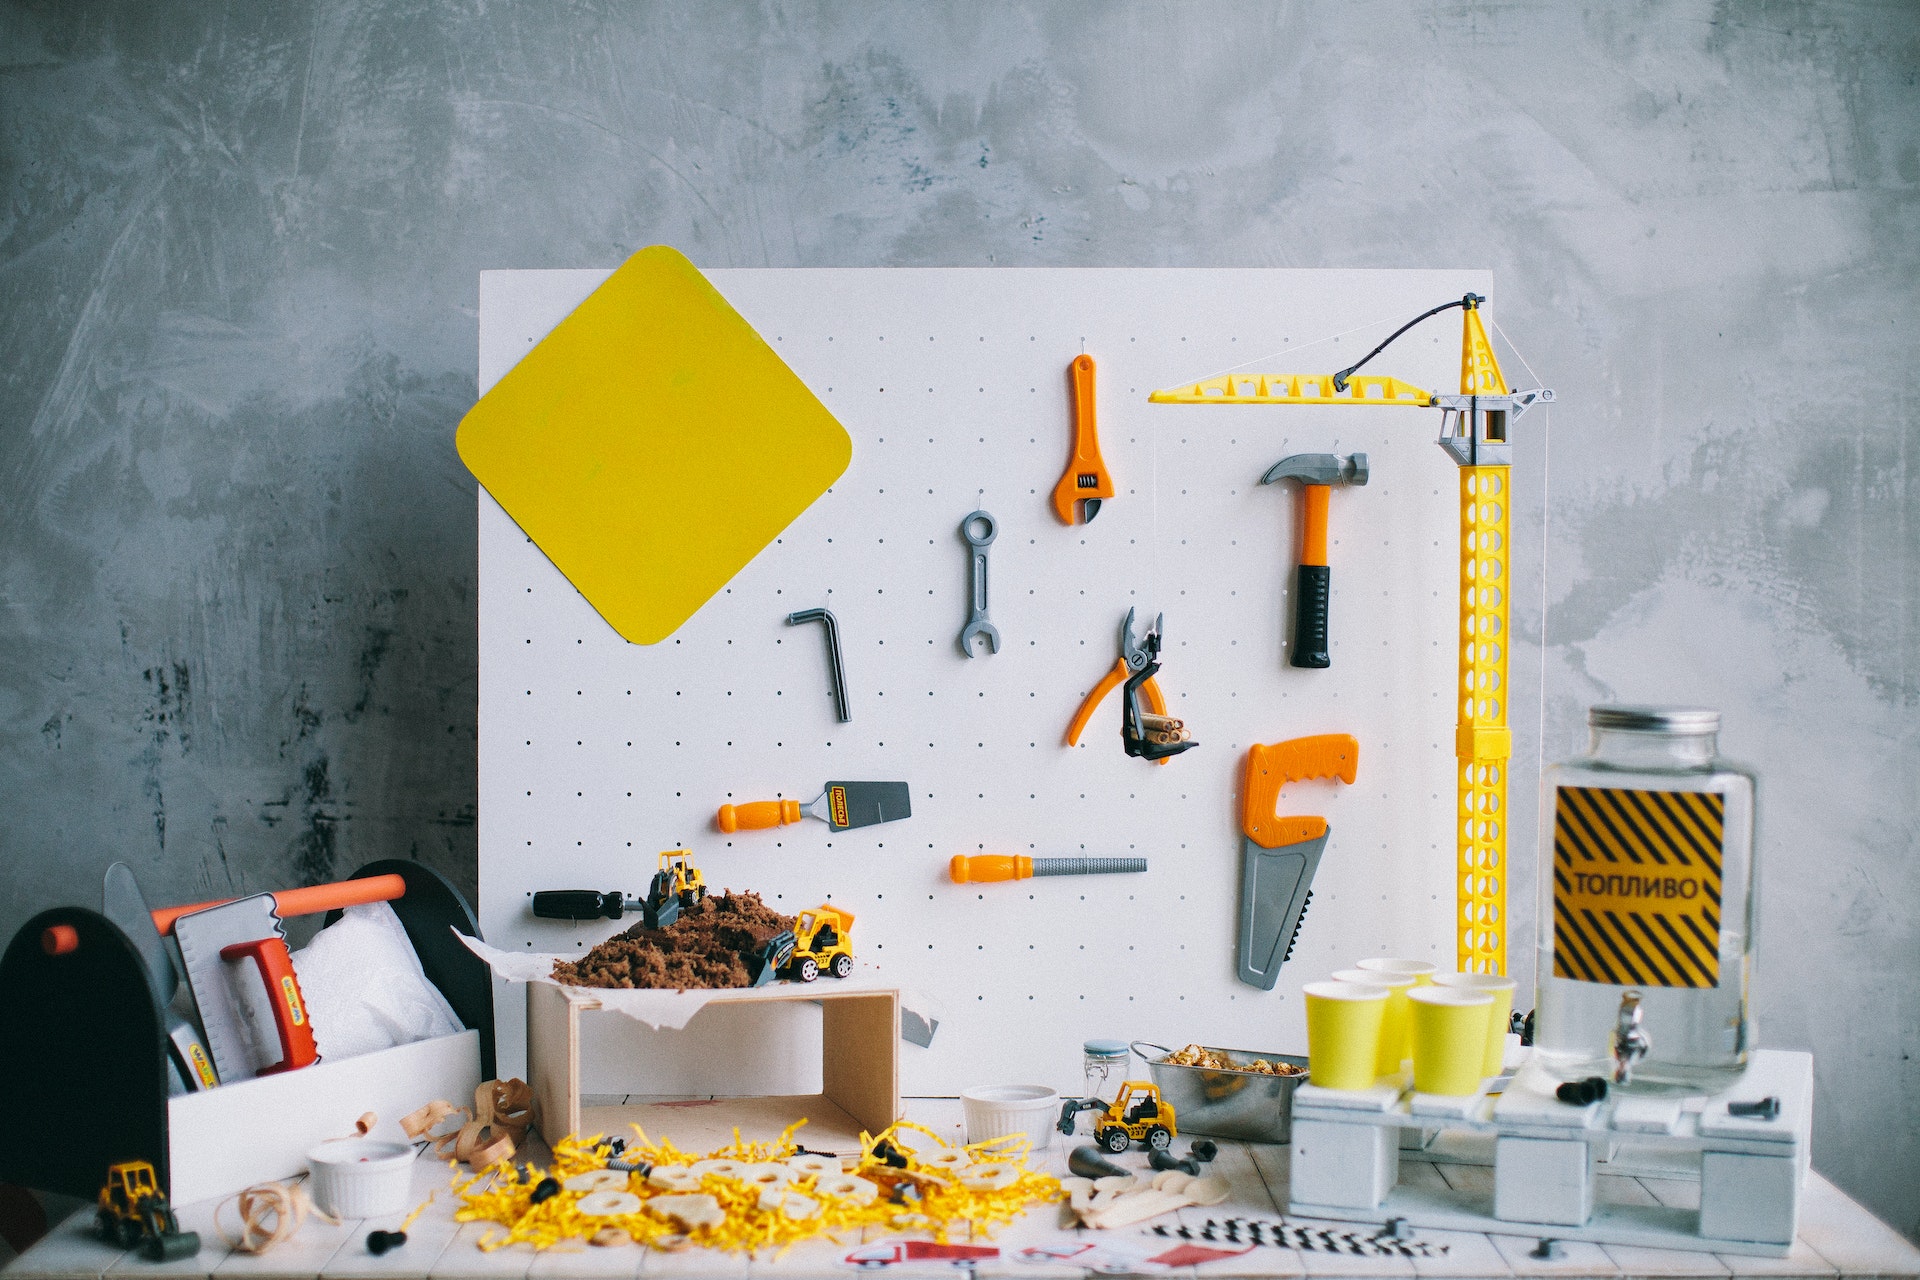 Le pegboard toujours aussi populaire